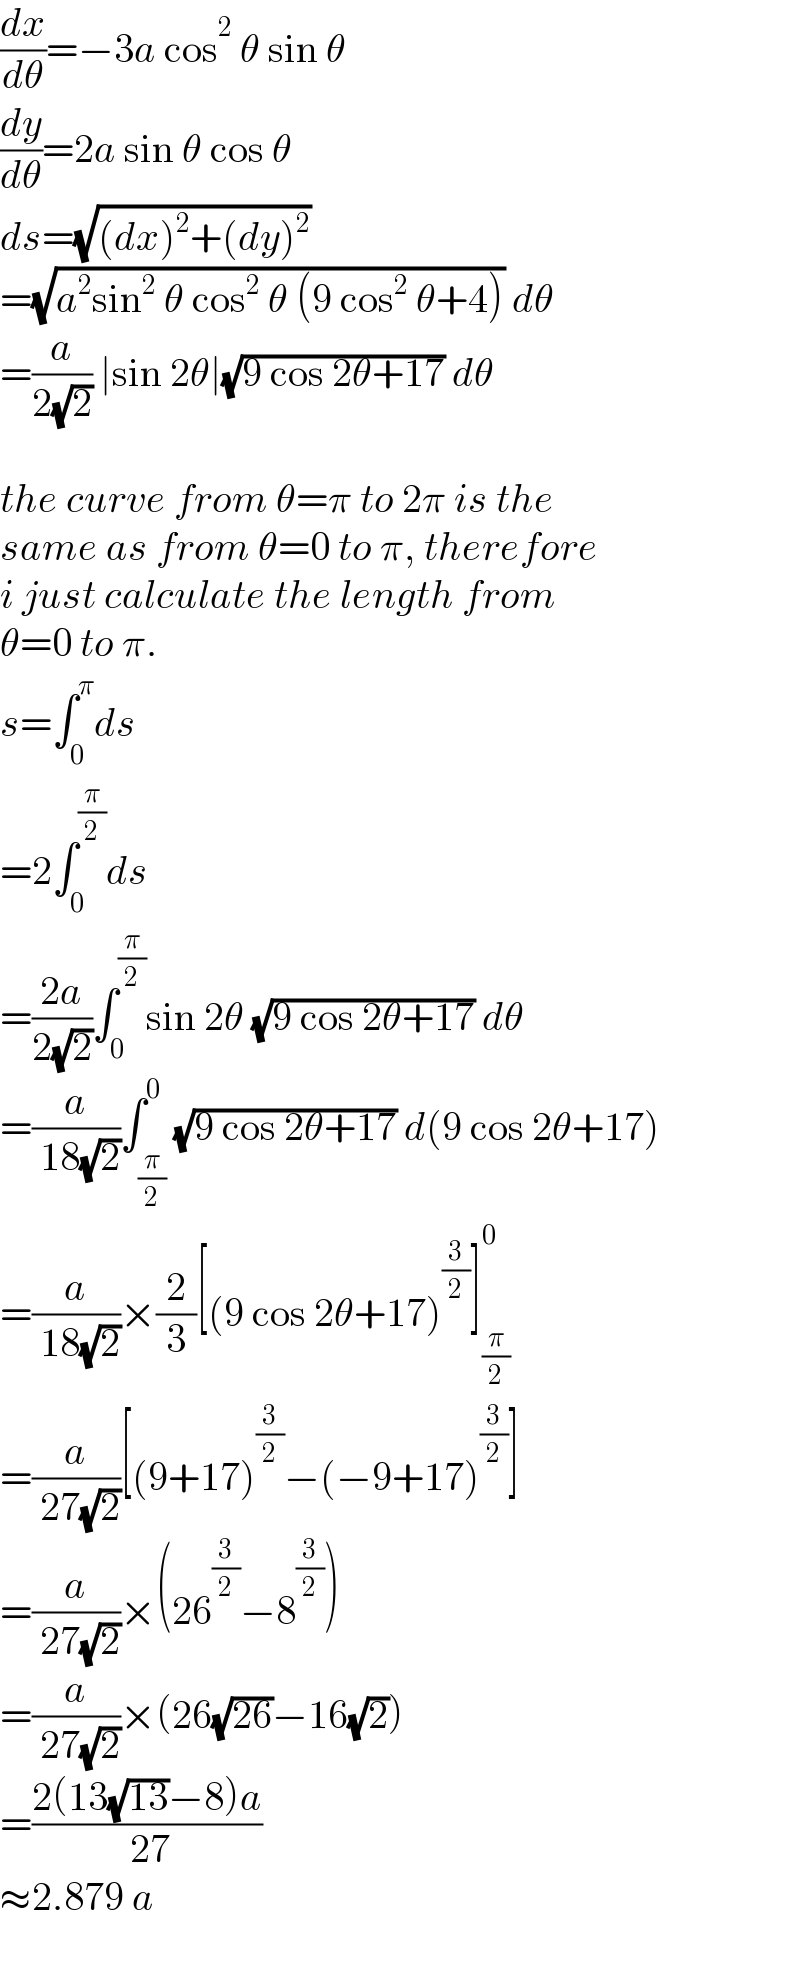 (dx/dθ)=−3a cos^2  θ sin θ  (dy/dθ)=2a sin θ cos θ  ds=(√((dx)^2 +(dy)^2 ))  =(√(a^2 sin^2  θ cos^2  θ (9 cos^2  θ+4))) dθ  =(a/(2(√2))) ∣sin 2θ∣(√(9 cos 2θ+17)) dθ    the curve from θ=π to 2π is the  same as from θ=0 to π, therefore  i just calculate the length from  θ=0 to π.  s=∫_0 ^π ds  =2∫_0 ^(π/2) ds  =((2a)/(2(√2)))∫_0 ^(π/2) sin 2θ (√(9 cos 2θ+17)) dθ  =(a/( 18(√2)))∫_(π/2) ^0 (√(9 cos 2θ+17)) d(9 cos 2θ+17)  =(a/( 18(√2)))×(2/3)[(9 cos 2θ+17)^(3/2) ]_(π/2) ^0   =(a/( 27(√2)))[(9+17)^(3/2) −(−9+17)^(3/2) ]  =(a/( 27(√2)))×(26^(3/2) −8^(3/2) )  =(a/( 27(√2)))×(26(√(26))−16(√2))  =((2(13(√(13))−8)a)/( 27))  ≈2.879 a  